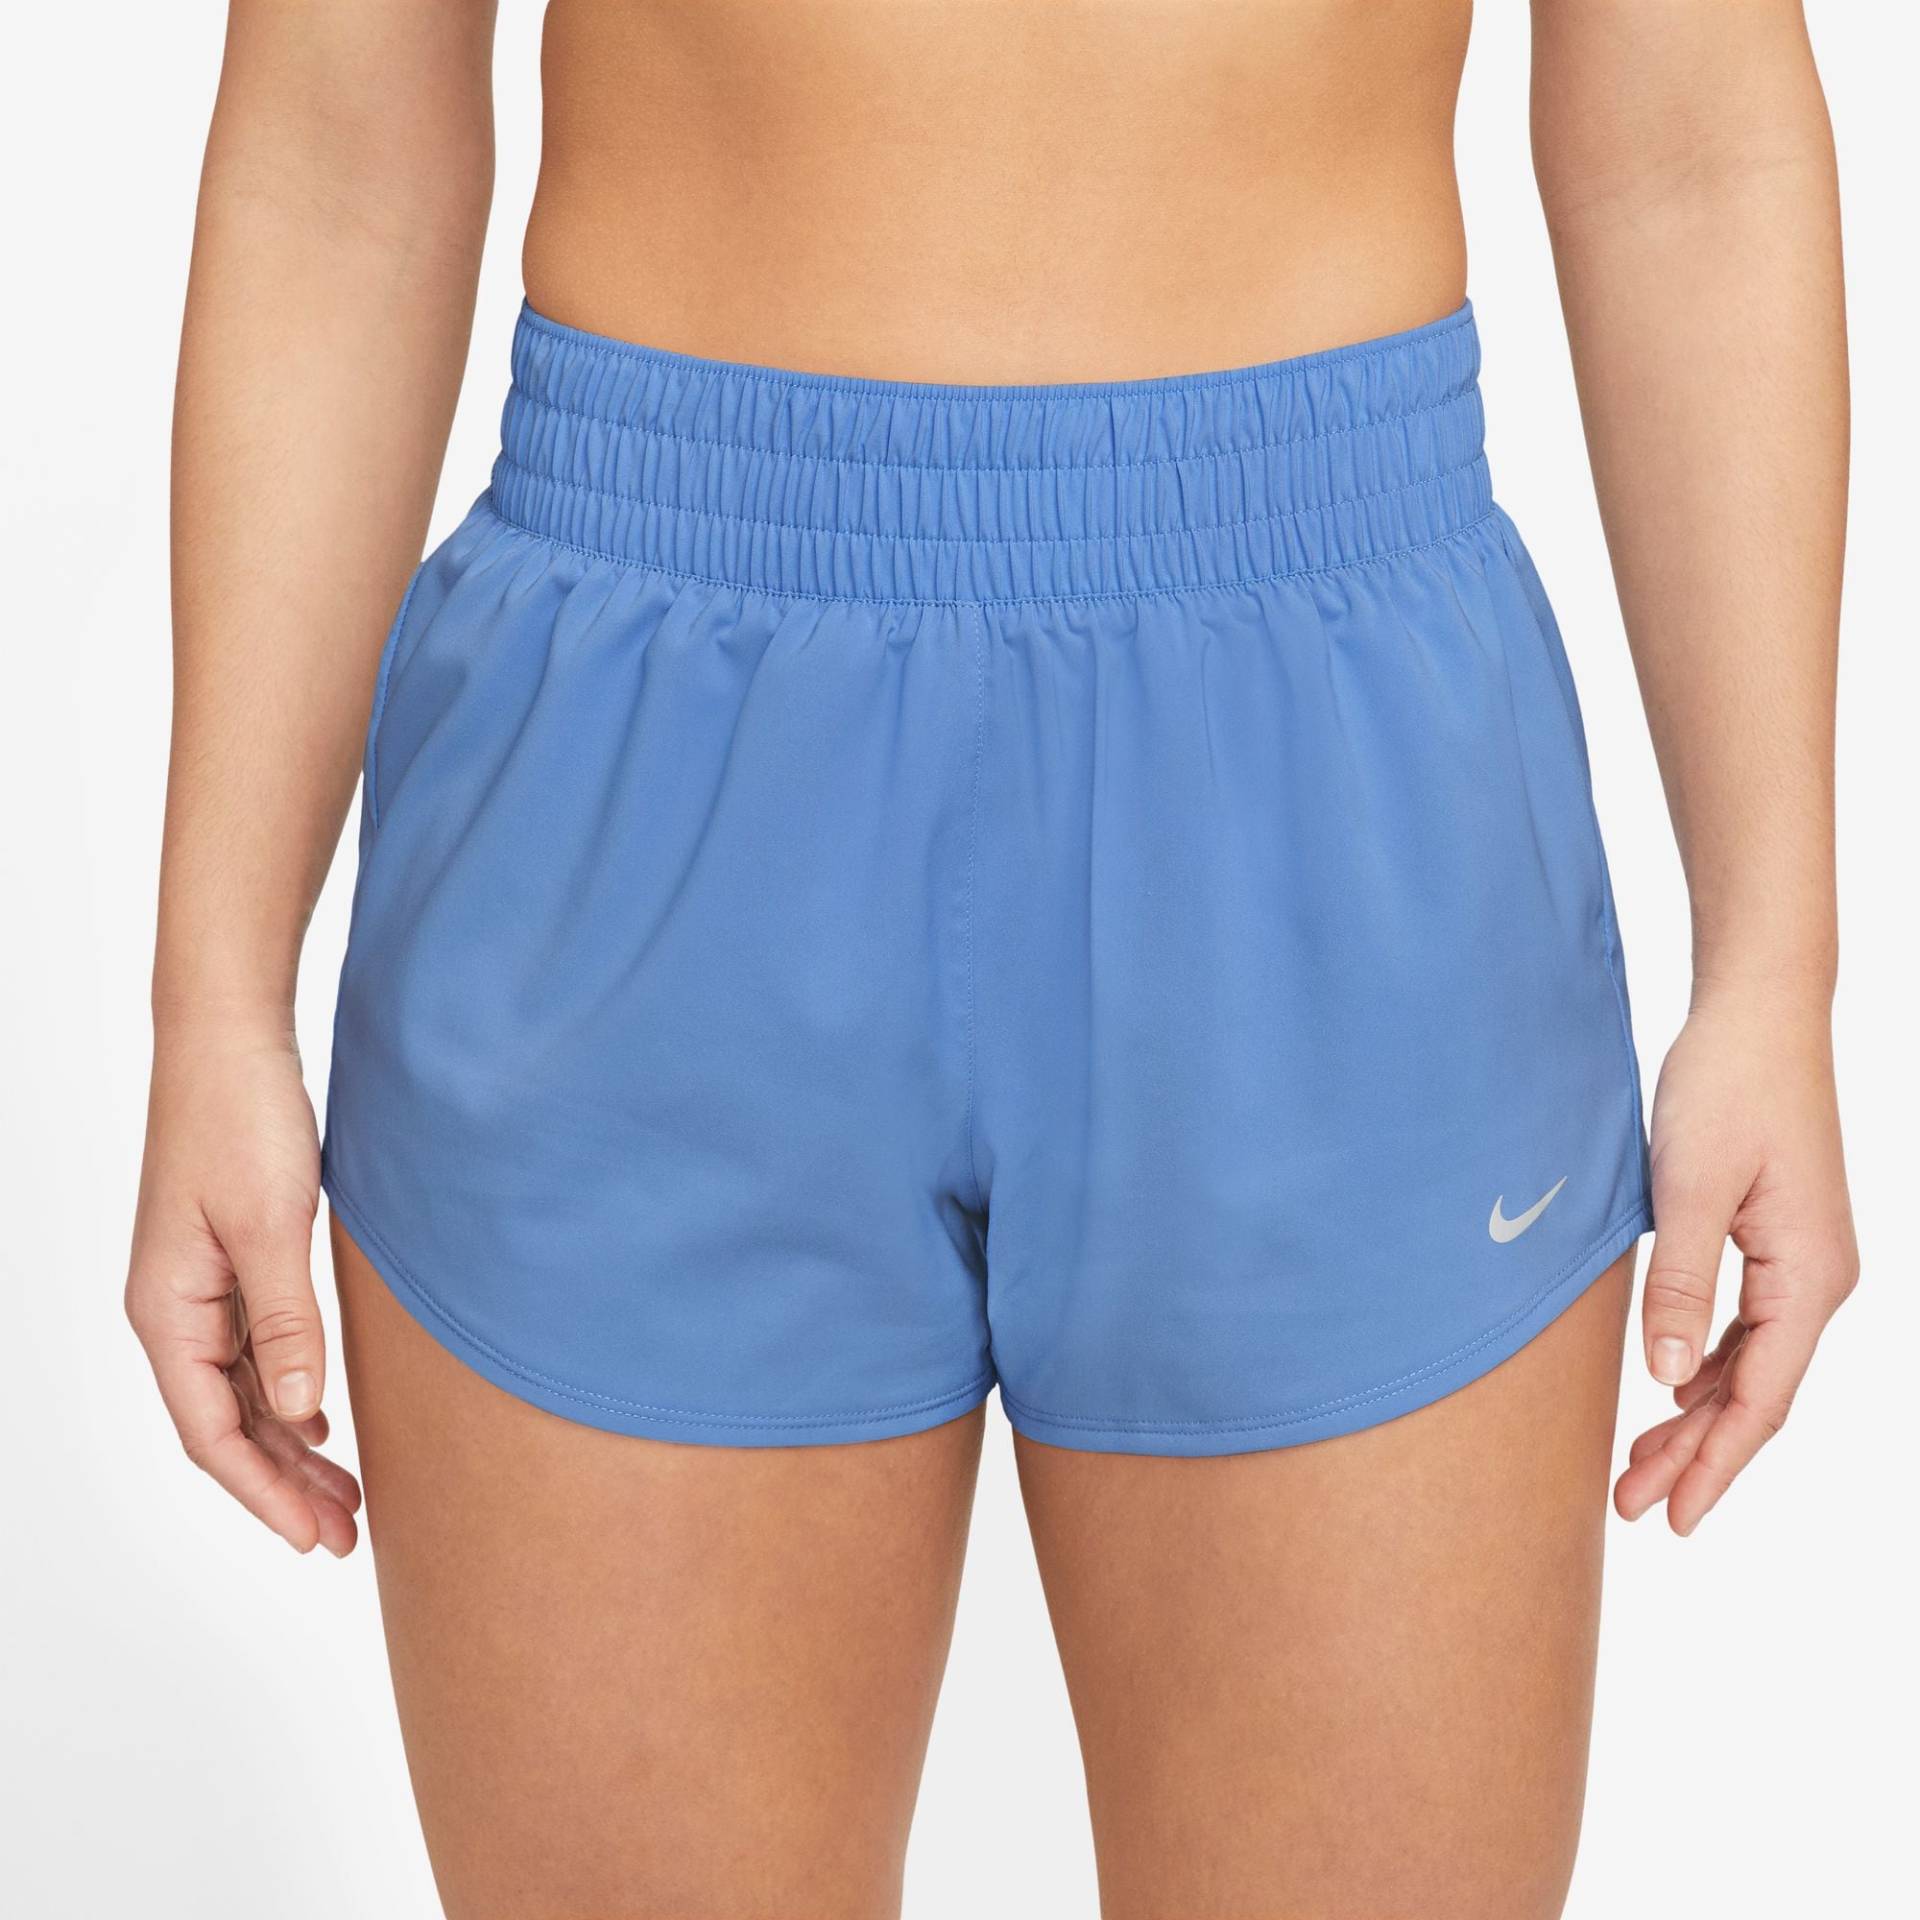 Nike Trainingsshorts »DRI-FIT ONE WOMEN'S MID-RISE BRIEF-LINED SHORTS« von Nike